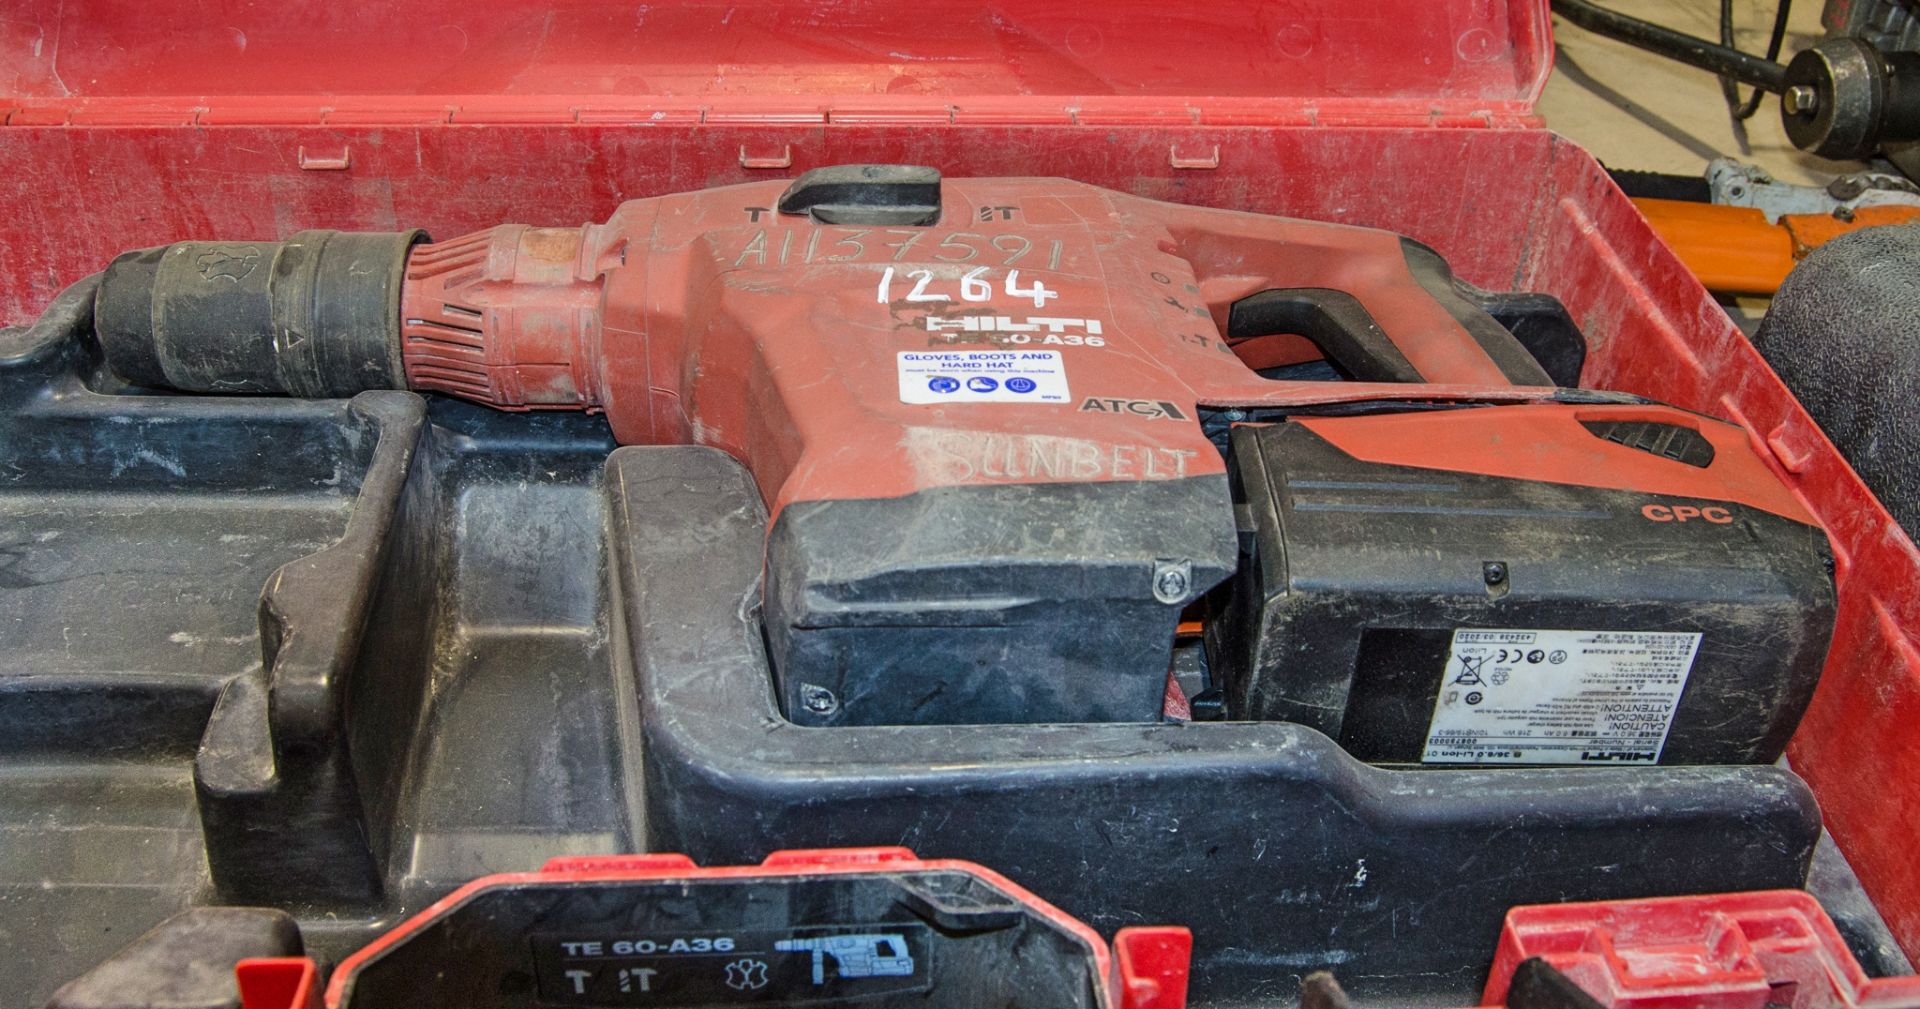 Hilti TE60-A36 36v cordless SDS rotary hammer drill c/w battery and carry case ** No charger **